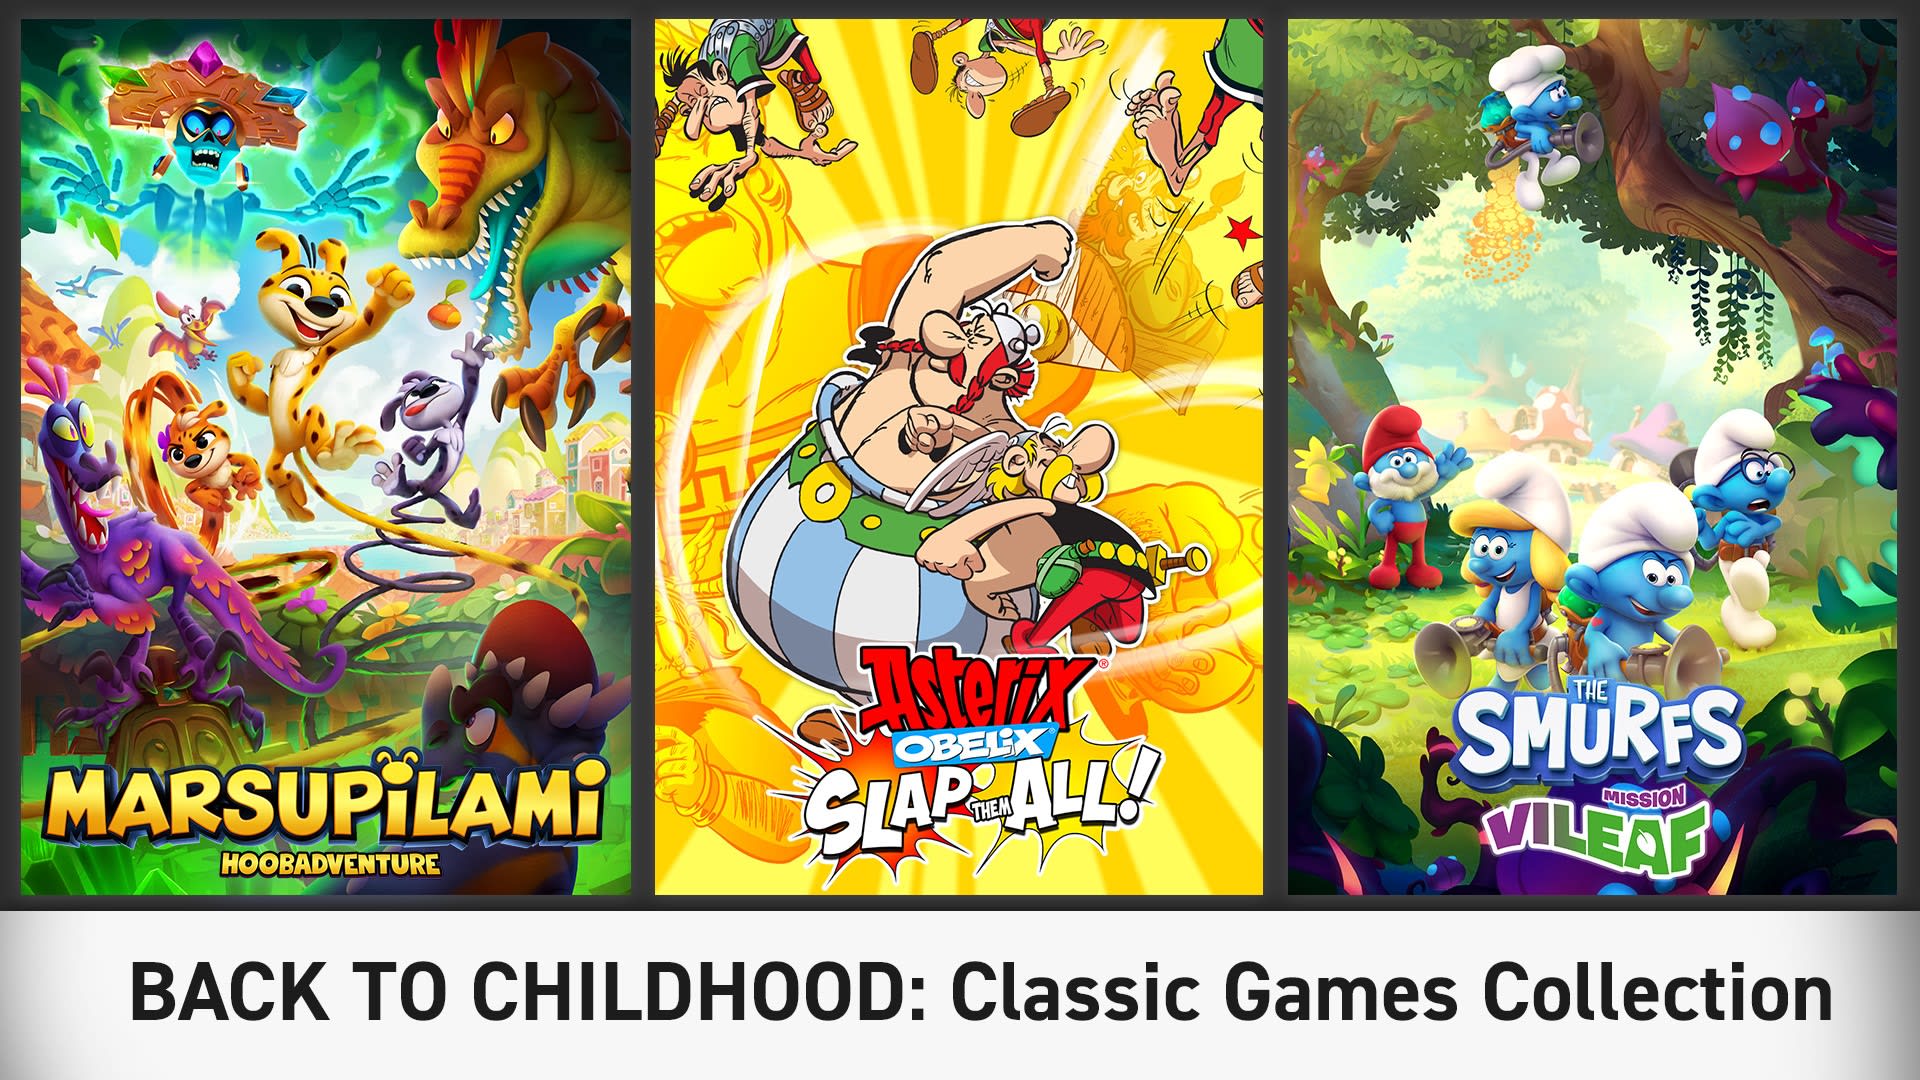 BACK TO CHILDHOOD: Classic Games Collection